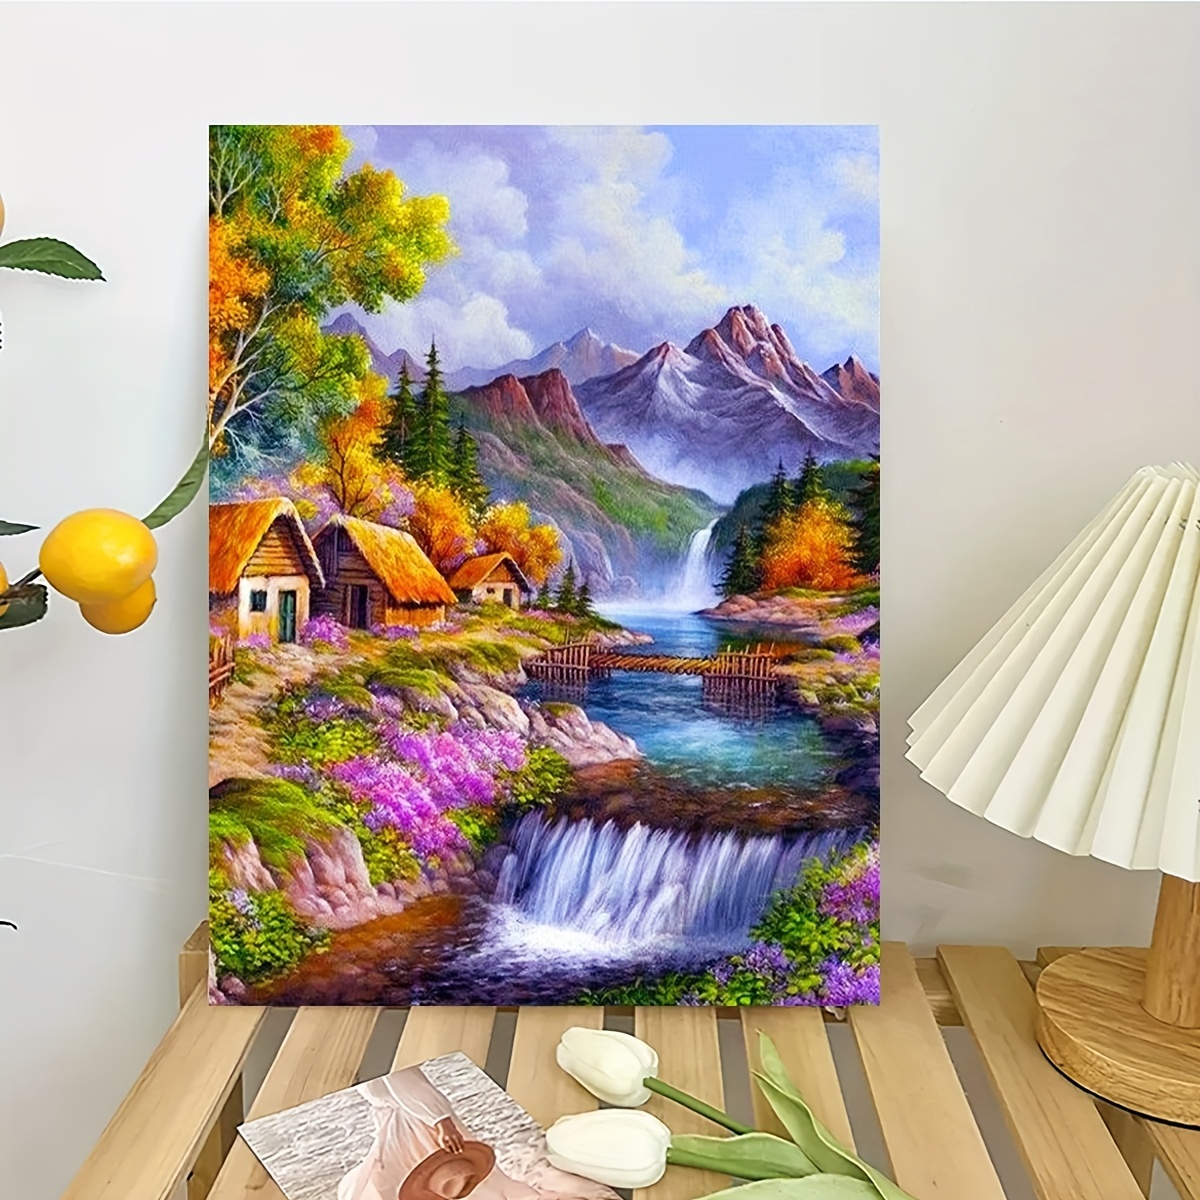 Beauty of Rural Landscape - Acrylic on Canvas Painting Painting by